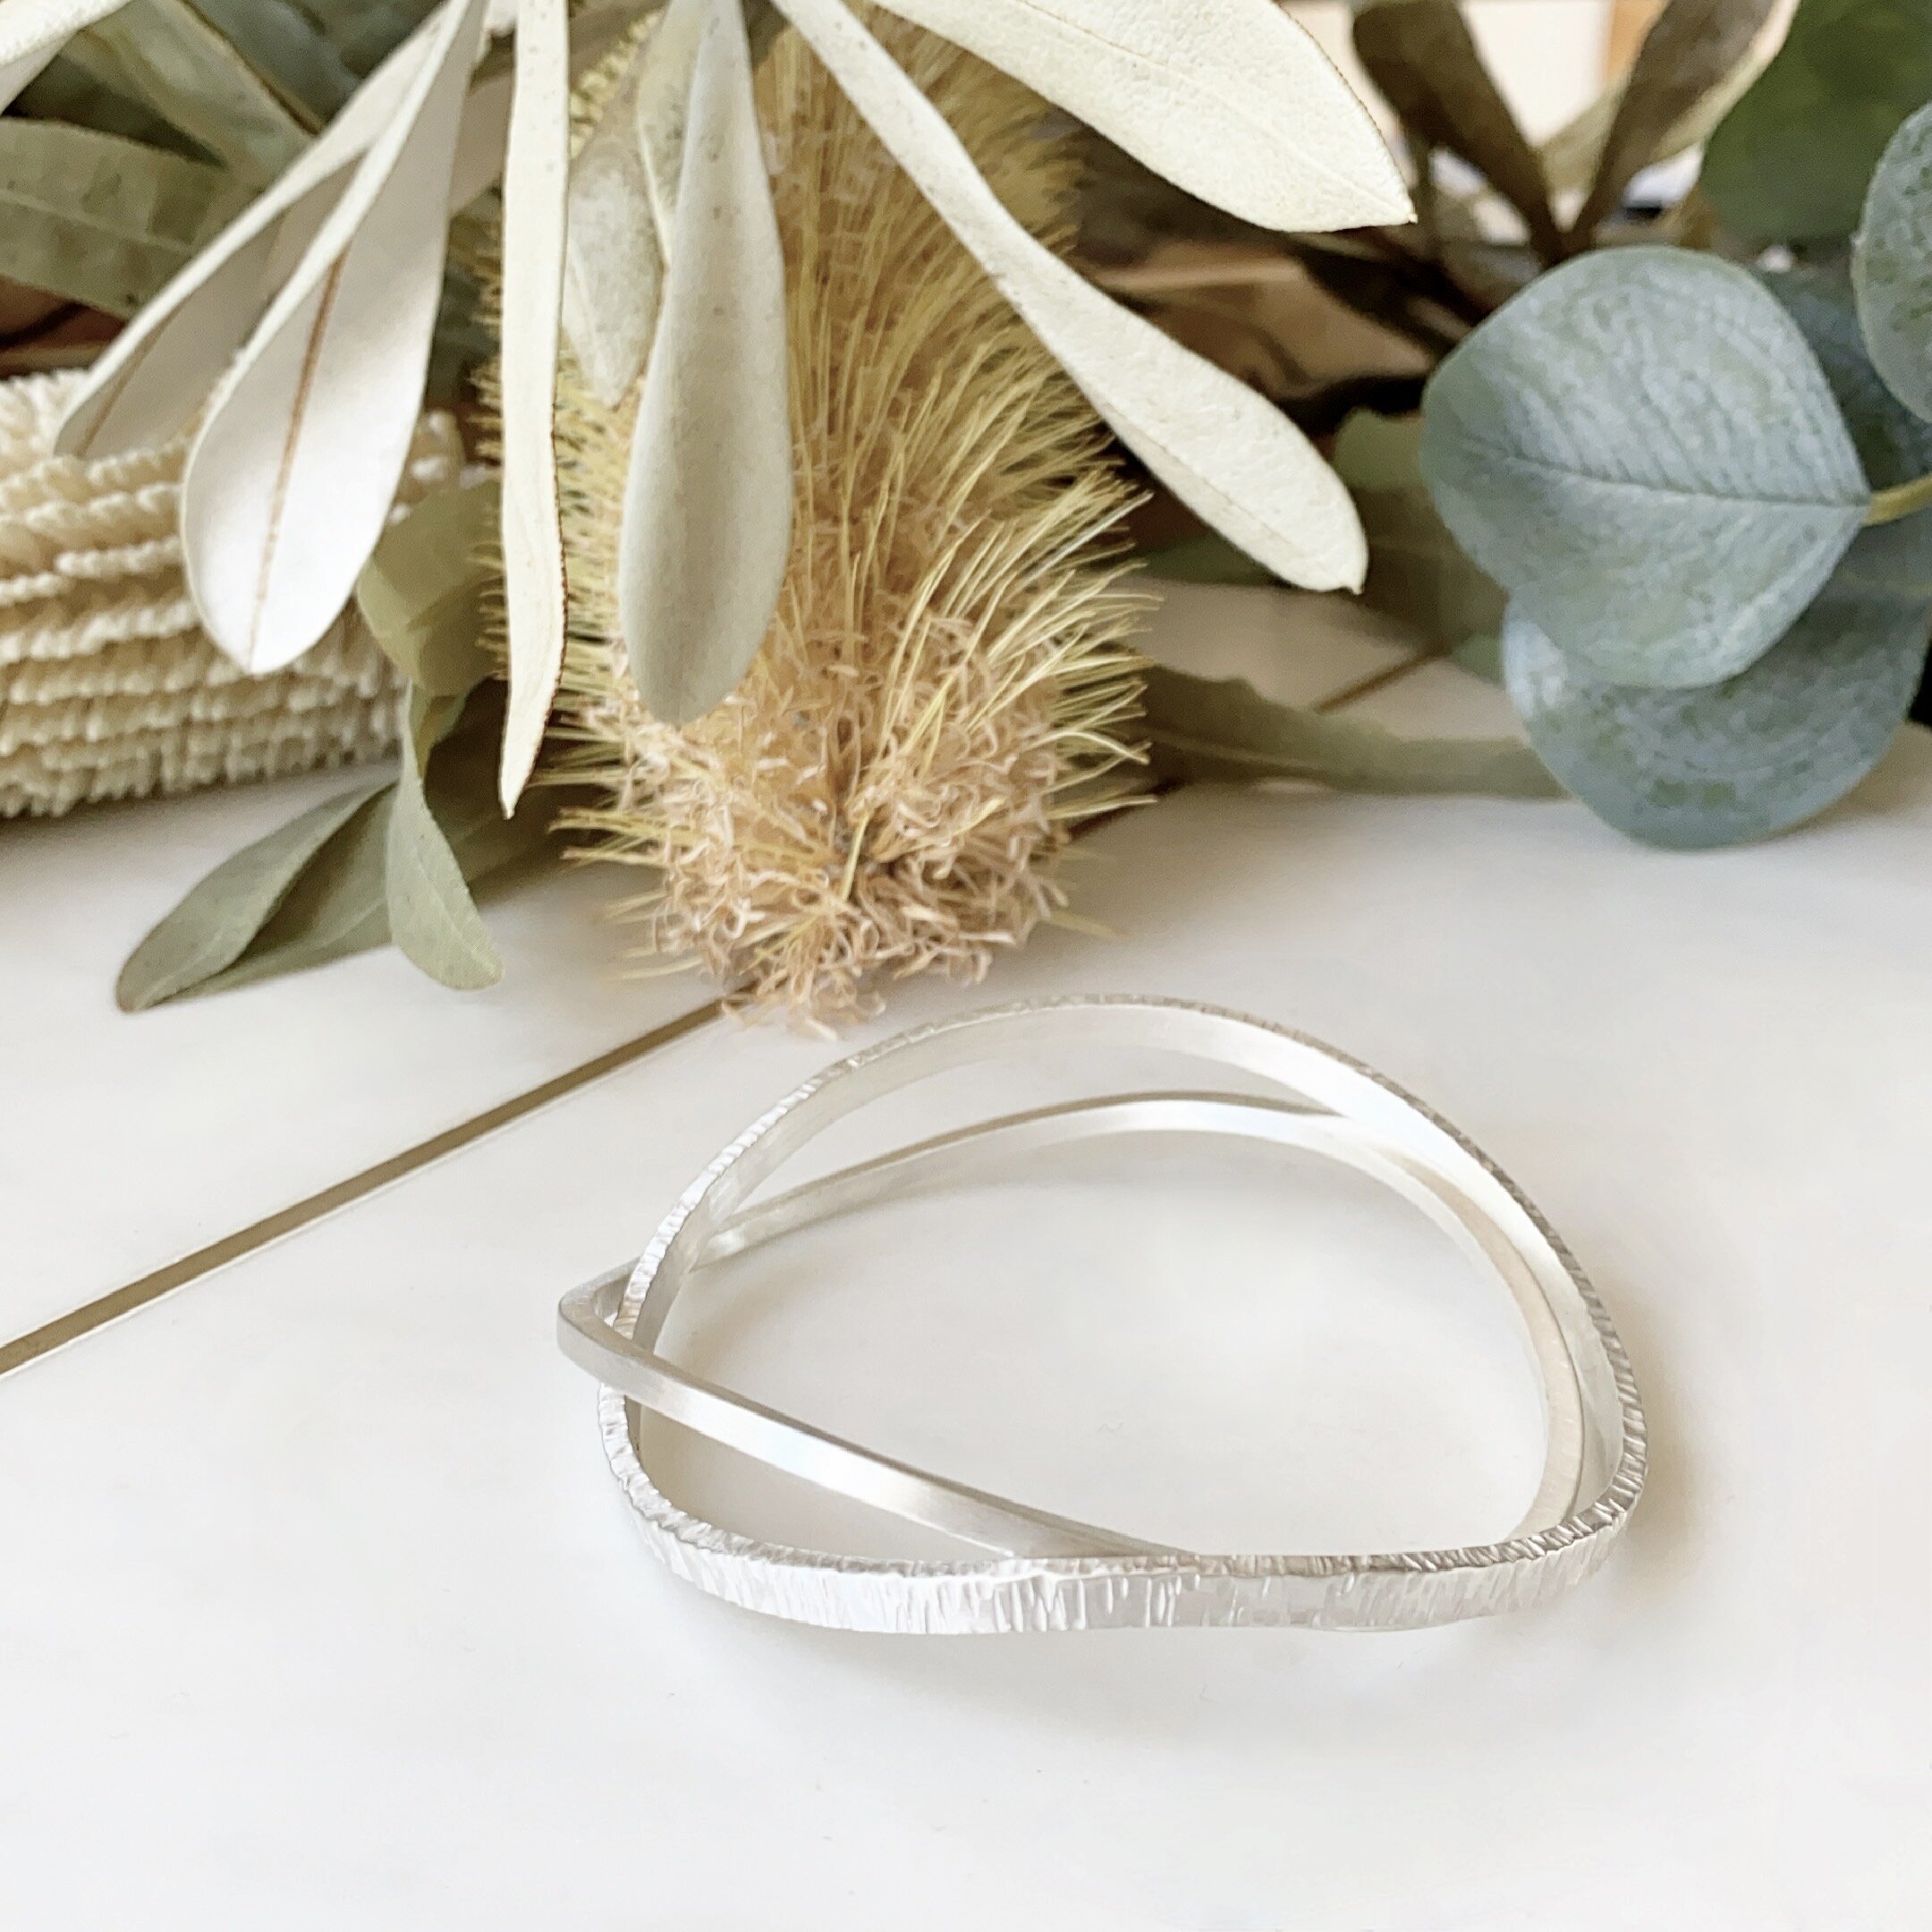 Sterling Silver Double Curved Square Edge Bangle Set "Modern Nature" With Matt/Brushed Lined Finish